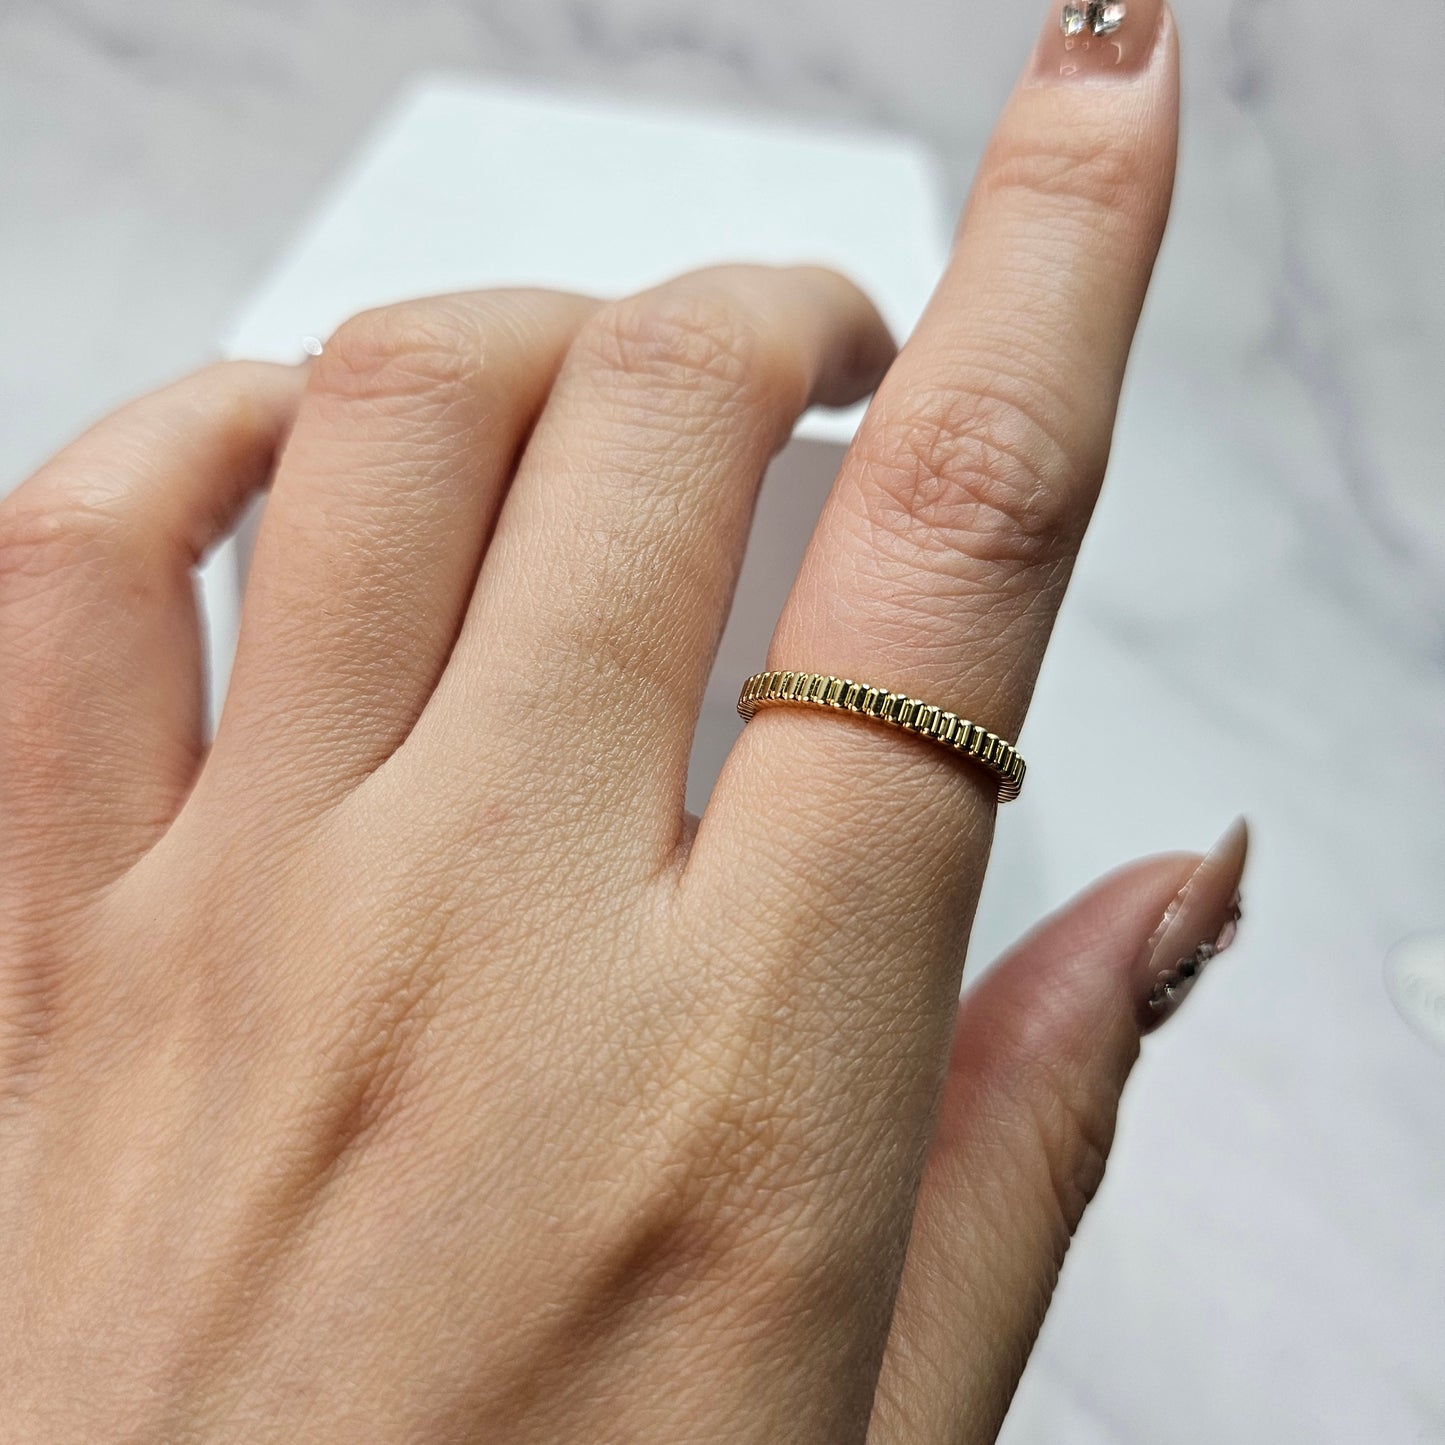 14k Gold Band 2.1mm/ Gold Band/ Promise Ring/ Simple Everyday Ring/ Flat Gold Band